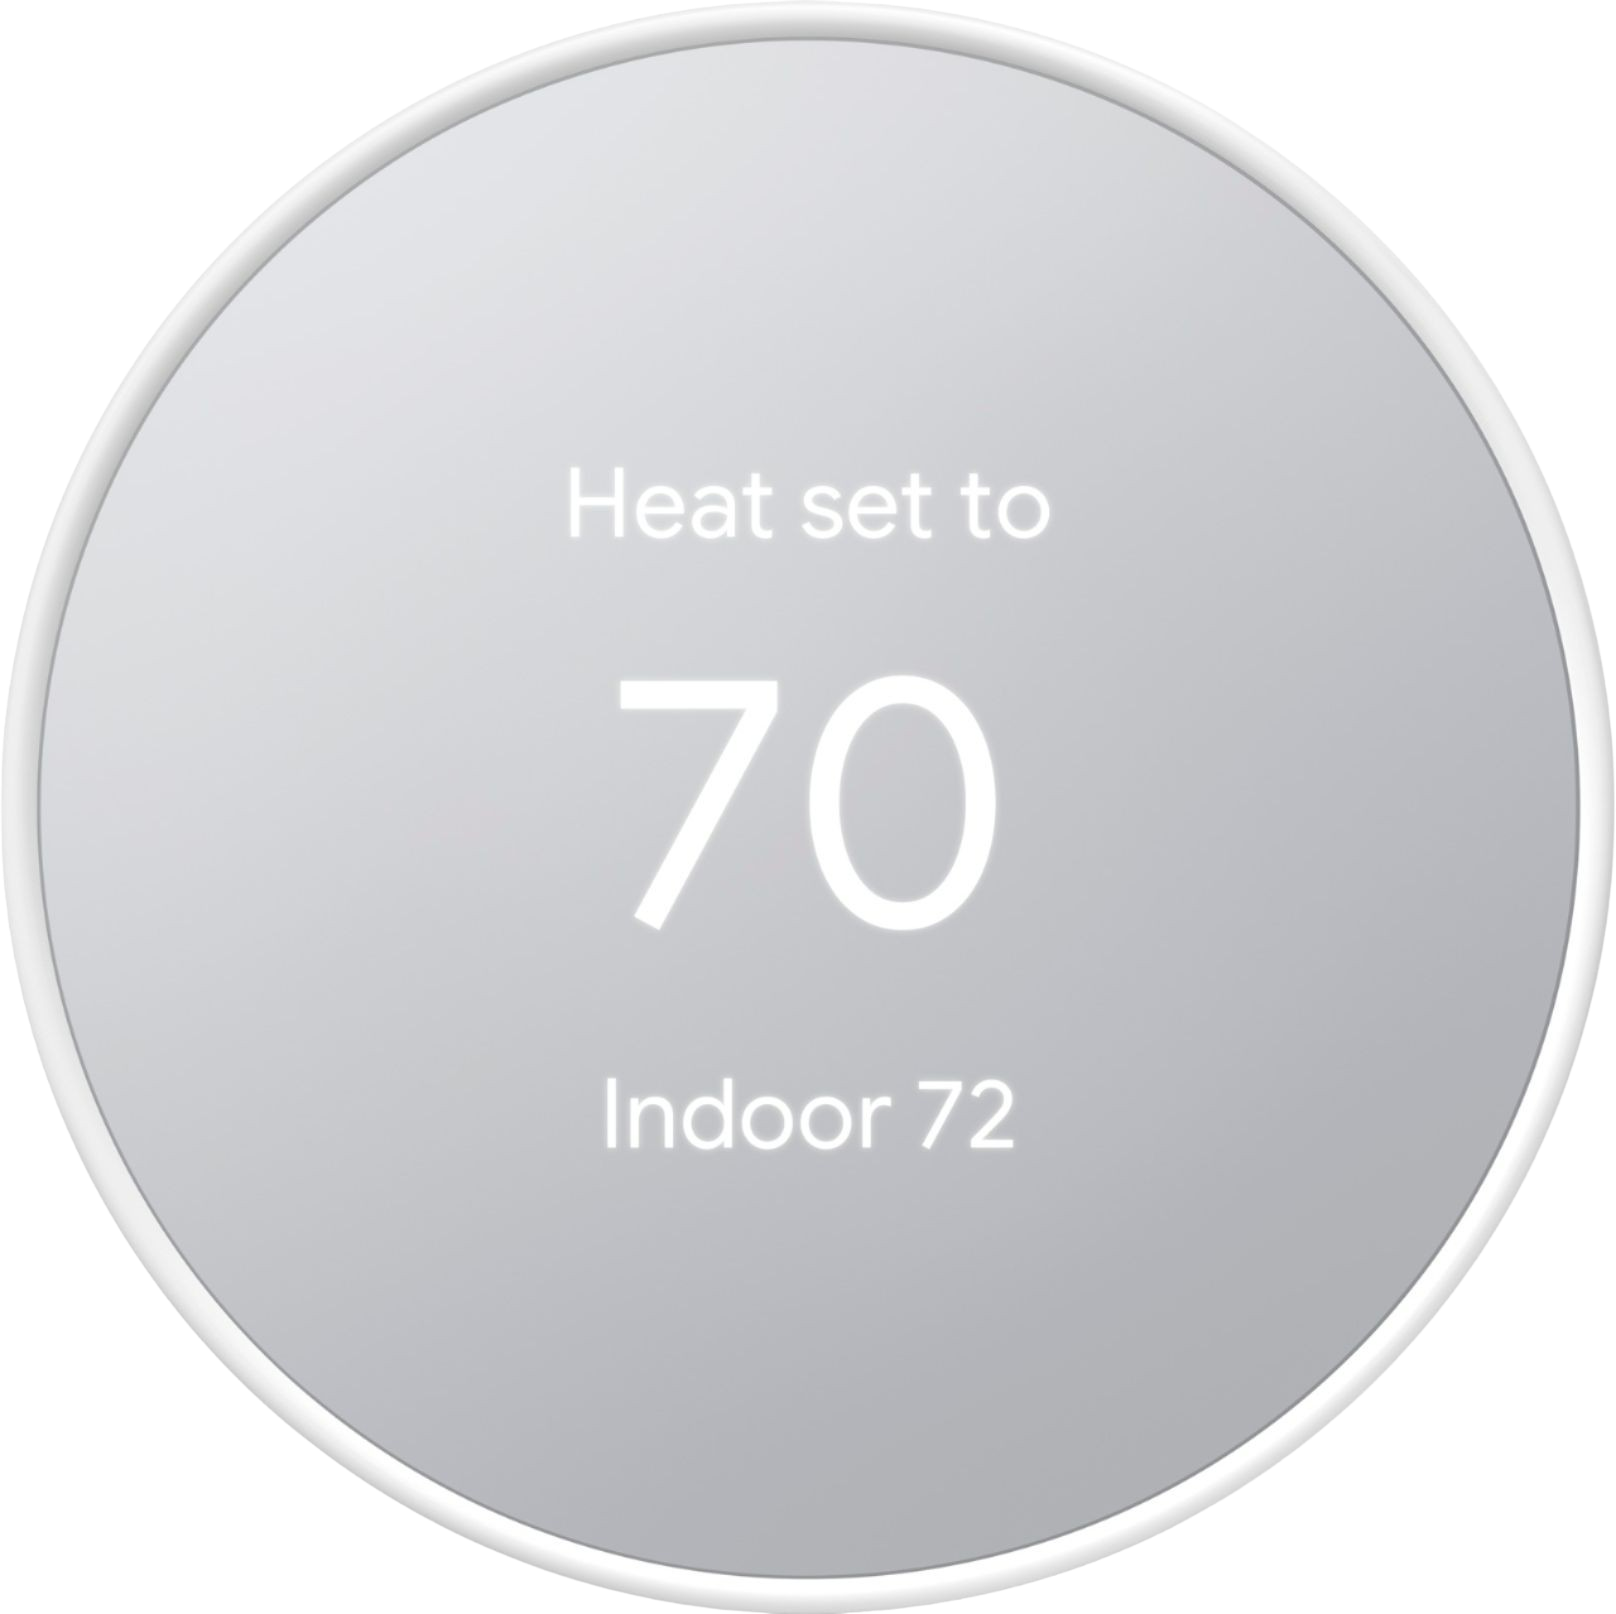 Rent Google Nest Thermostat from $7.90 per month